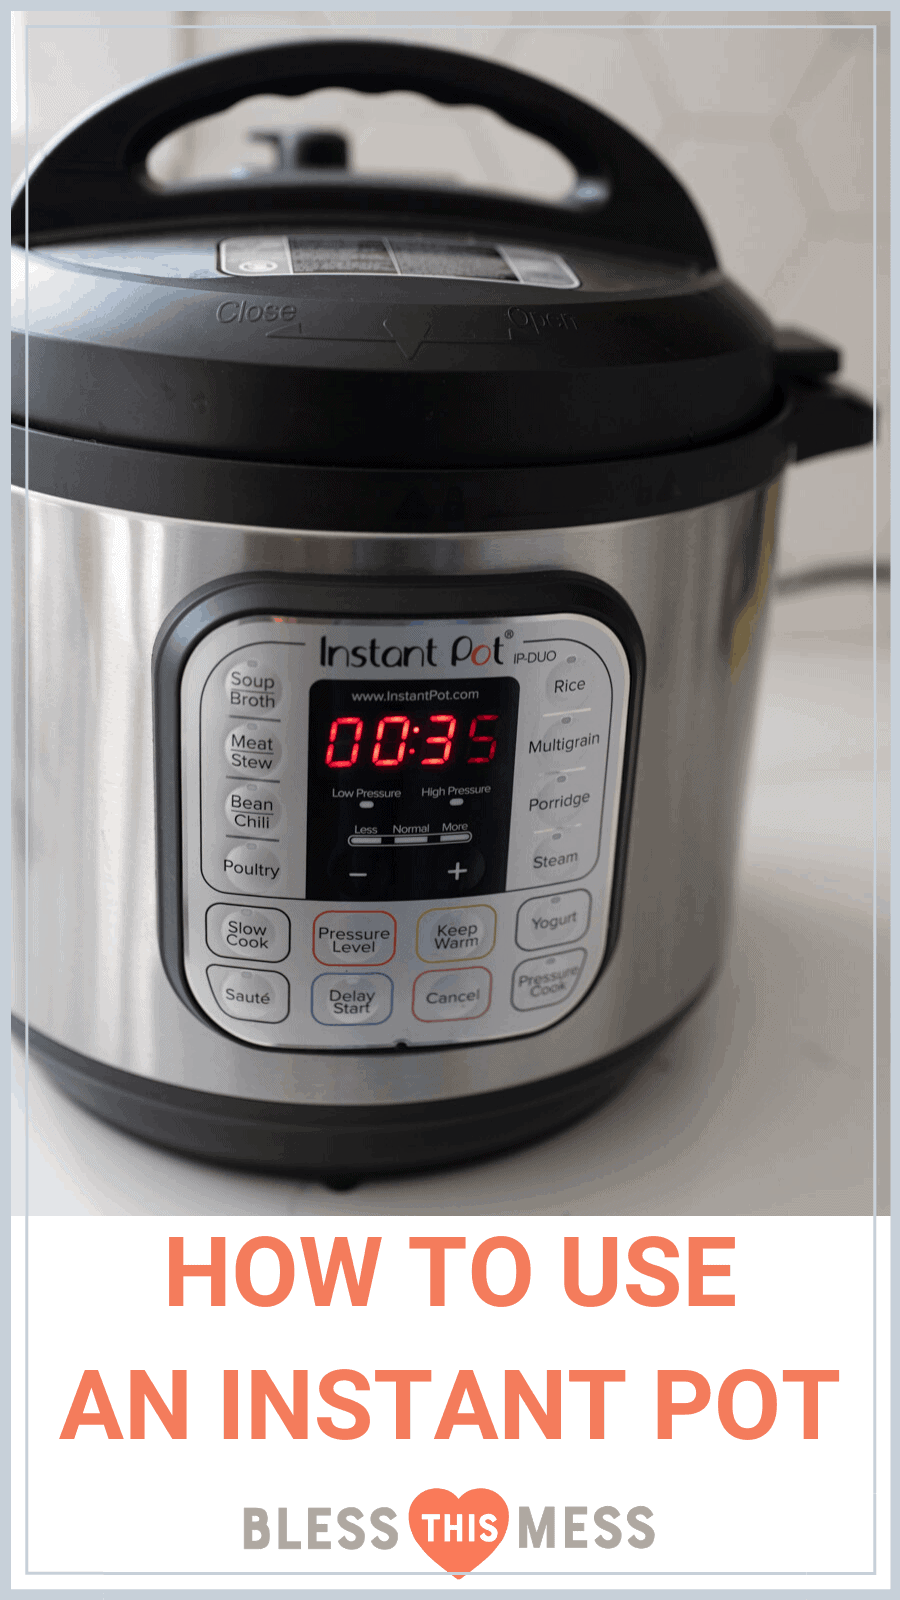 image of instant pot